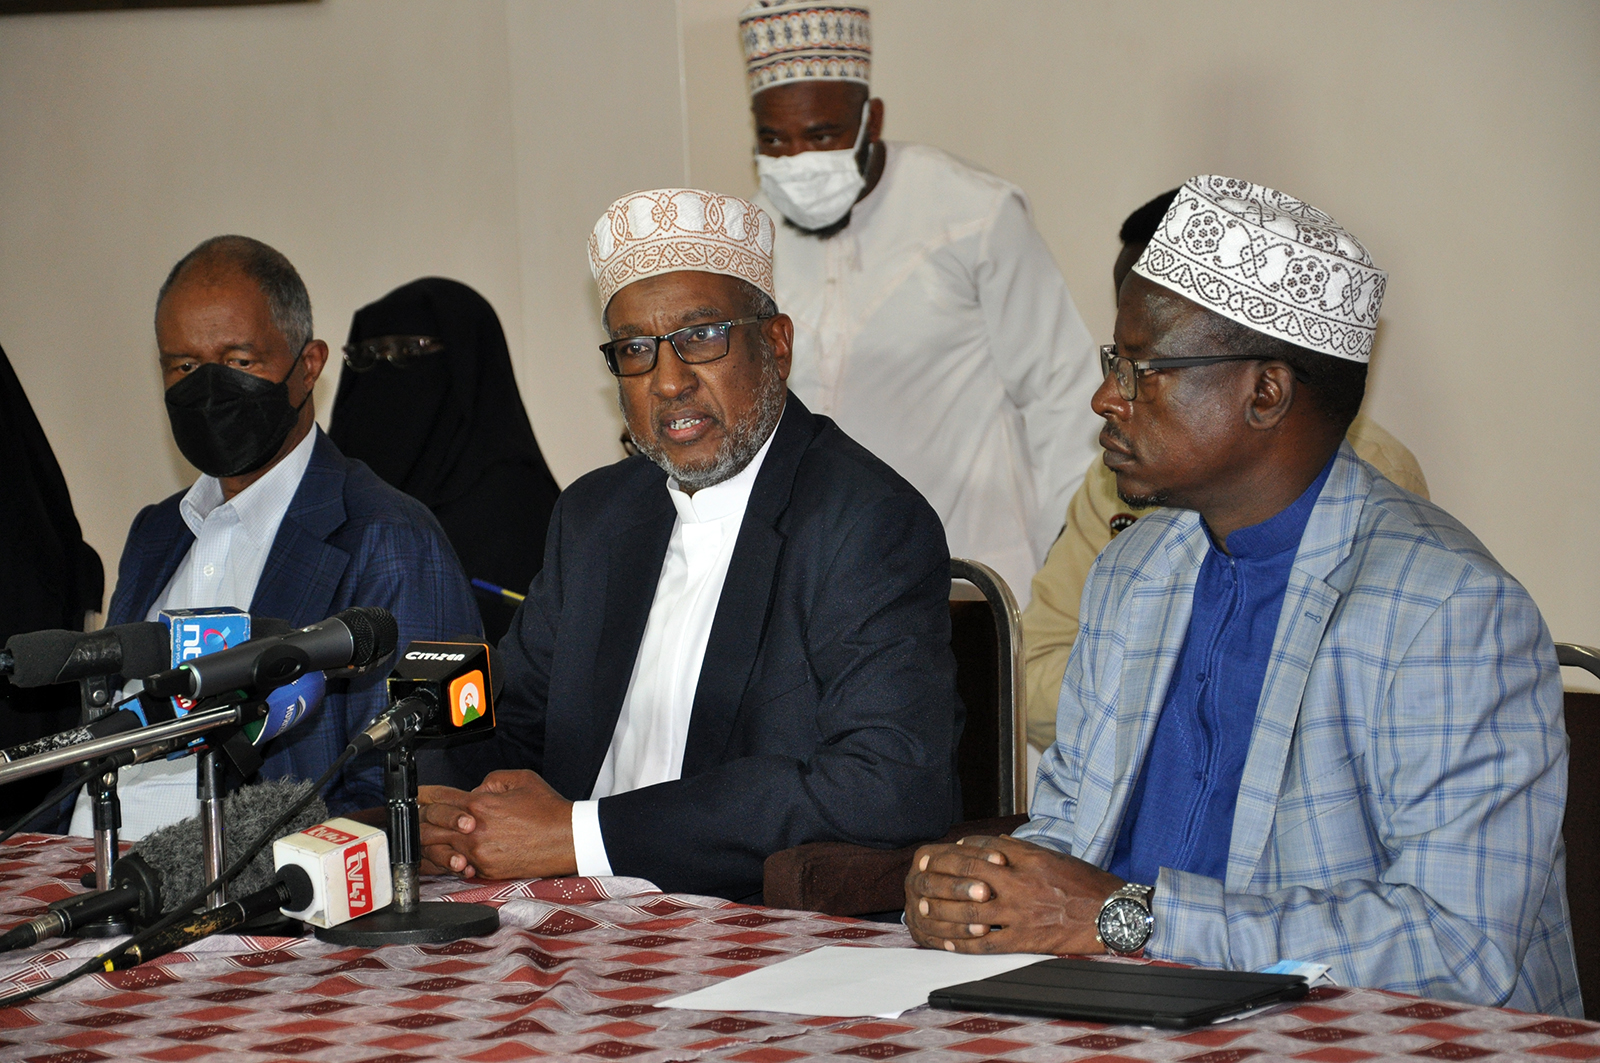 Sheikh Abdullahi Abdi, center, the chairman of the National Muslims Leaders Forum, speaks during a news conference at the Jamia Mosque in Nairobi, Kenya, on Oct. 29, 2021. RNS photo by Fredrick Nzwili